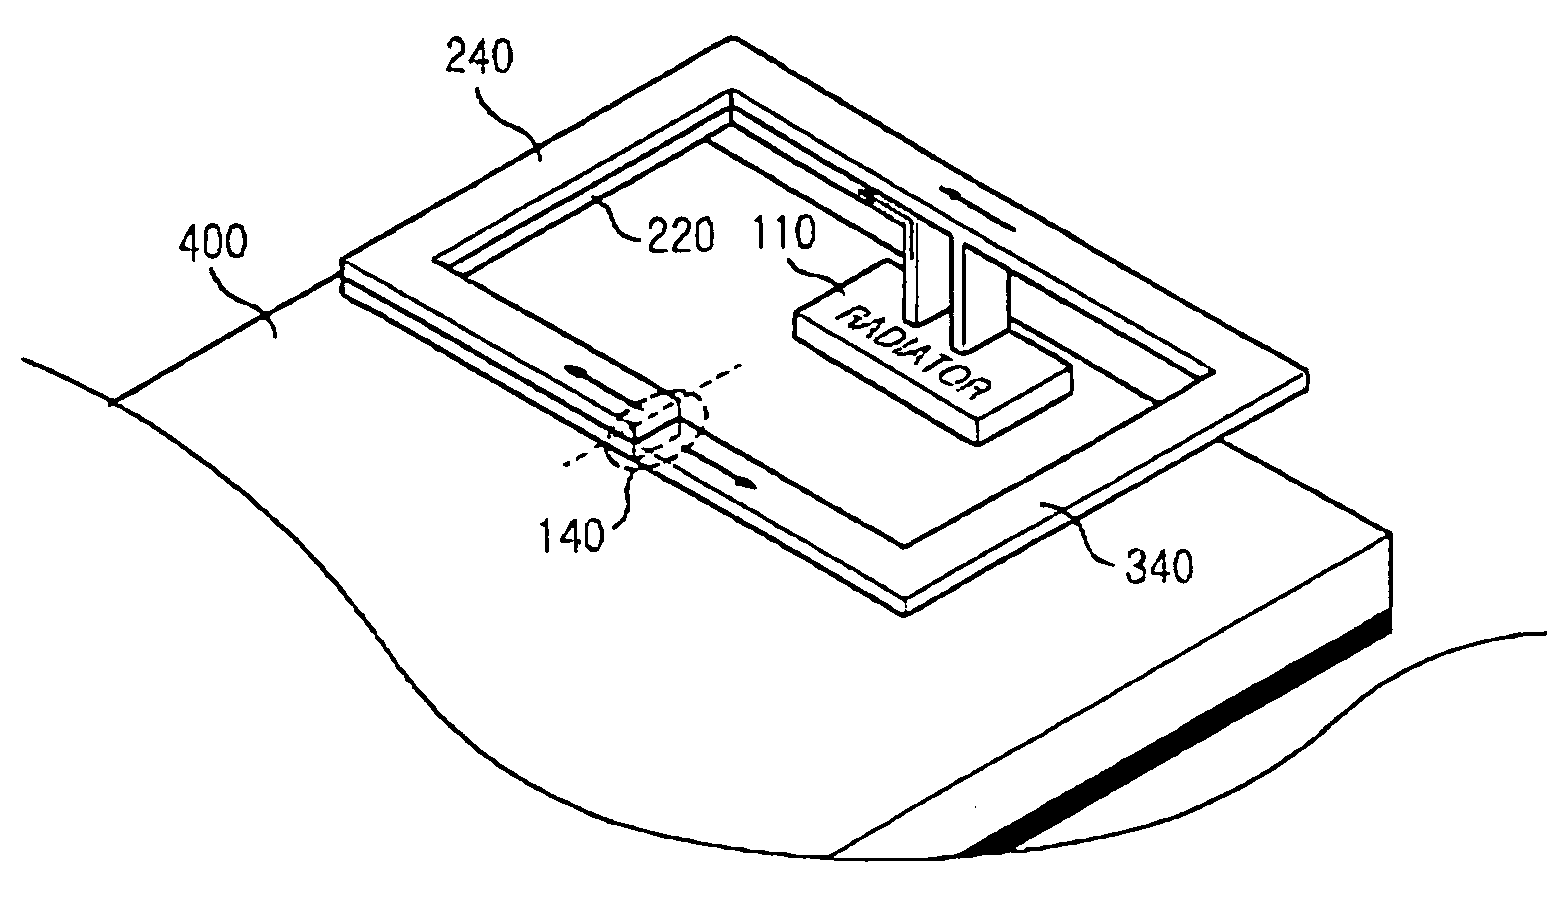 Loop antenna for a mobile terminal capable of reducing specific absorption rate